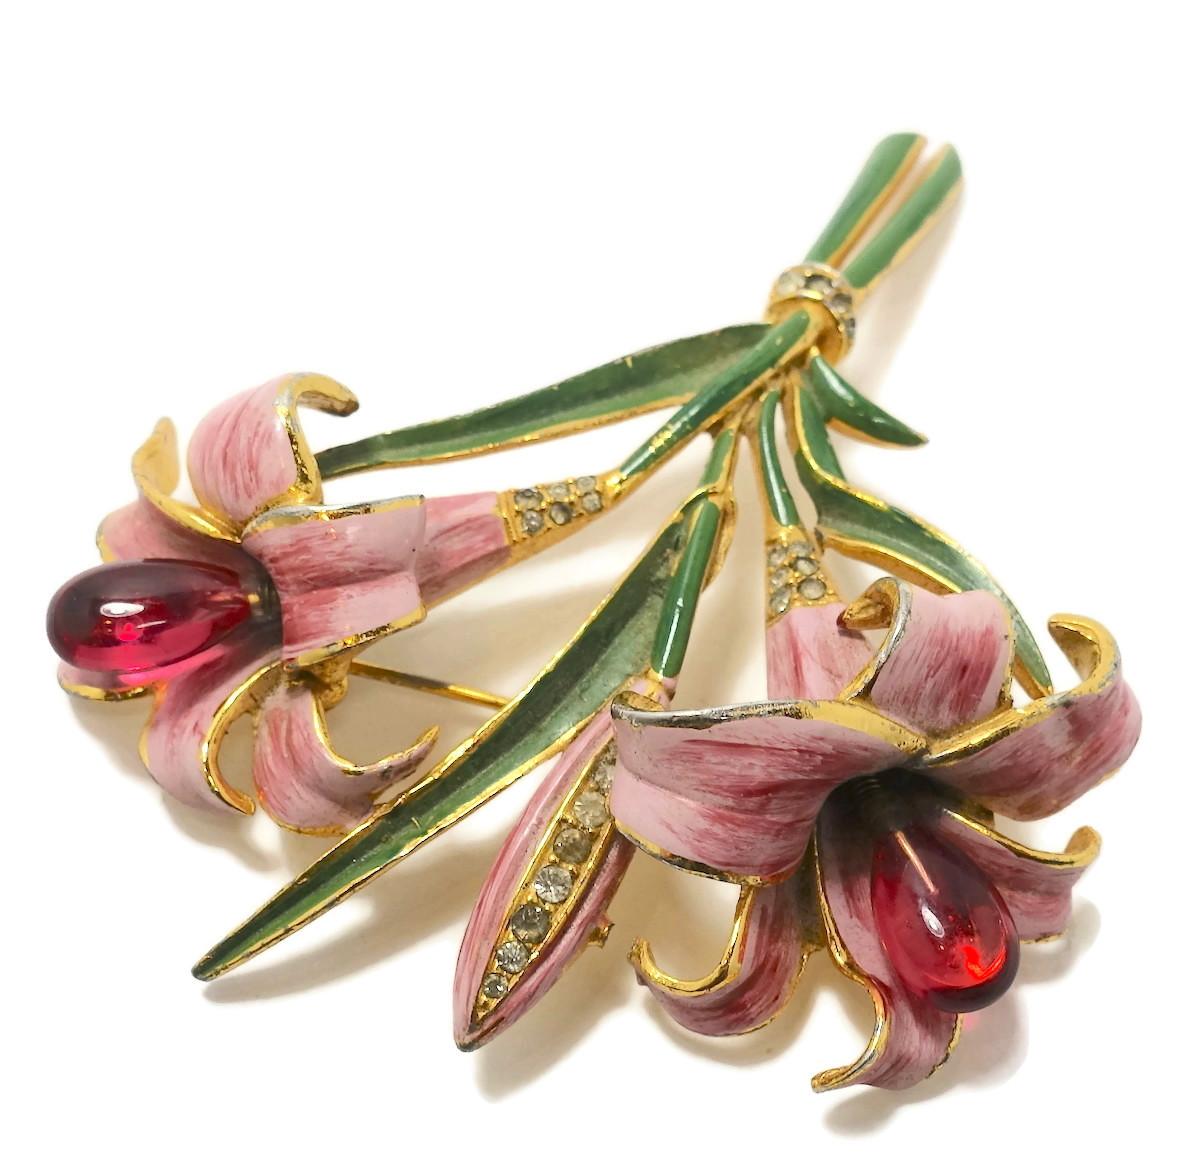 Although this gorgeous brooch is unsigned … it does have the look of a vintage Coro. This trembler brooch has red cabochon glass trembler buds coming out of pink enameled flowers. The leaves are green enamel with clear crystal accents in a gold tone